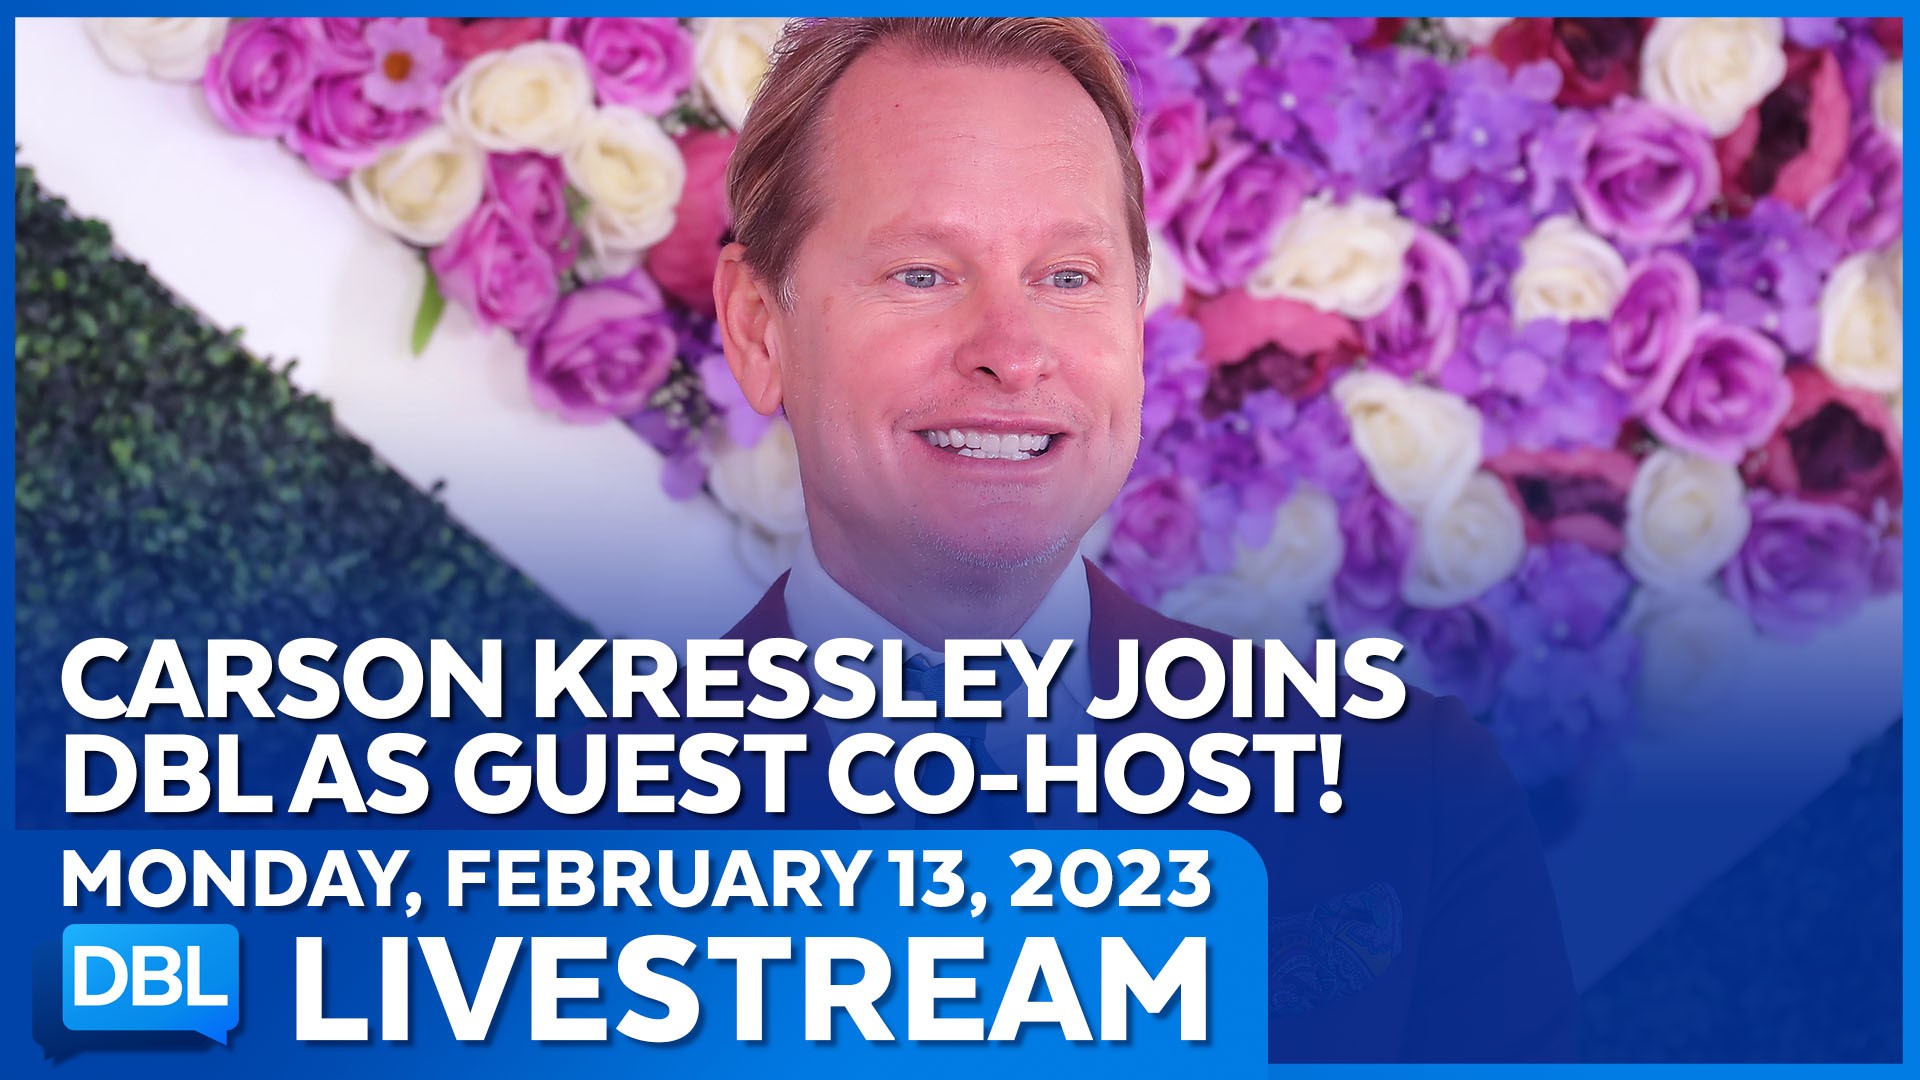 Carson Kressley joins the panel as guest co-host! Jinger Dugger Vuolo returns with husband Jeremy after opening up about stepping away from cult-like teachings.